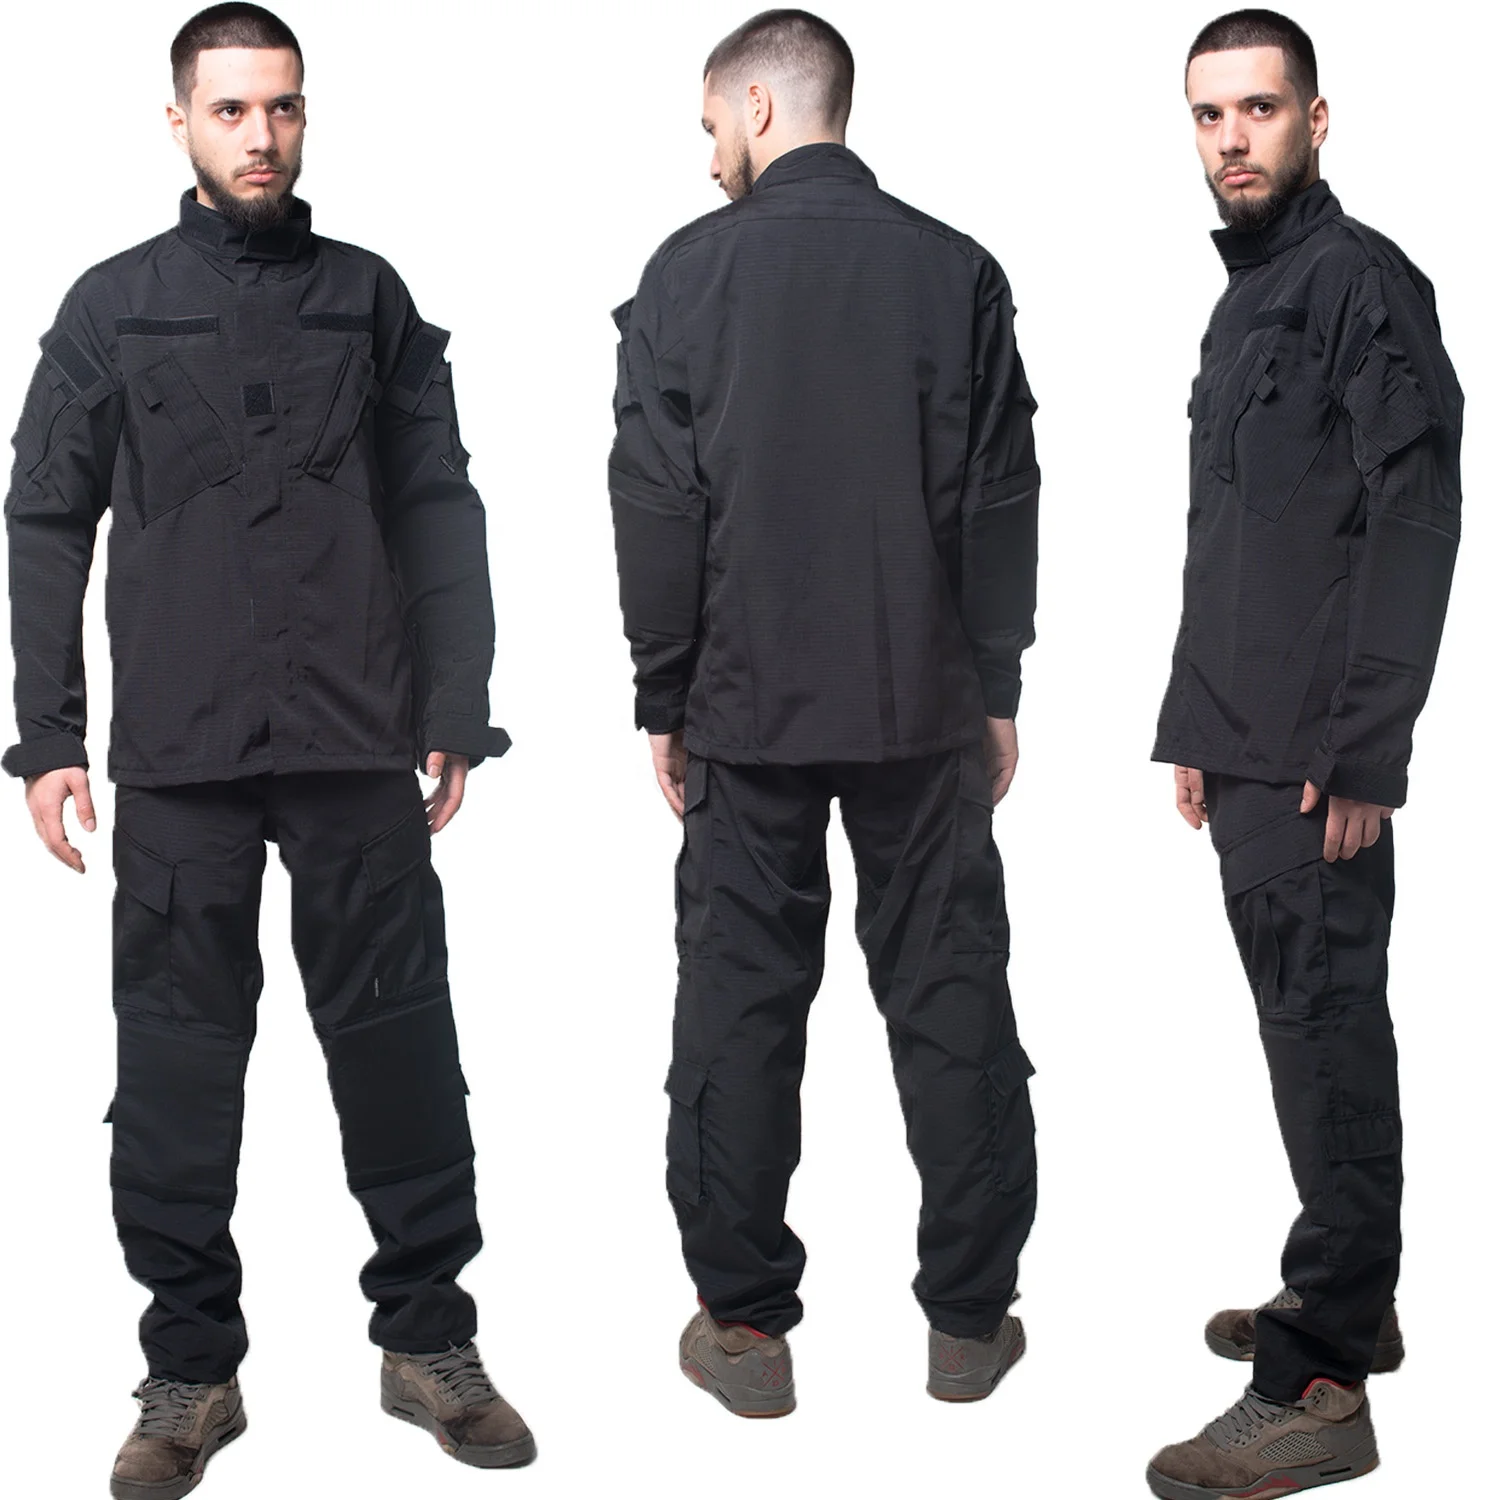 Made In Europe Comfortable Work Wear For Police,Law Enforcement Gear ...